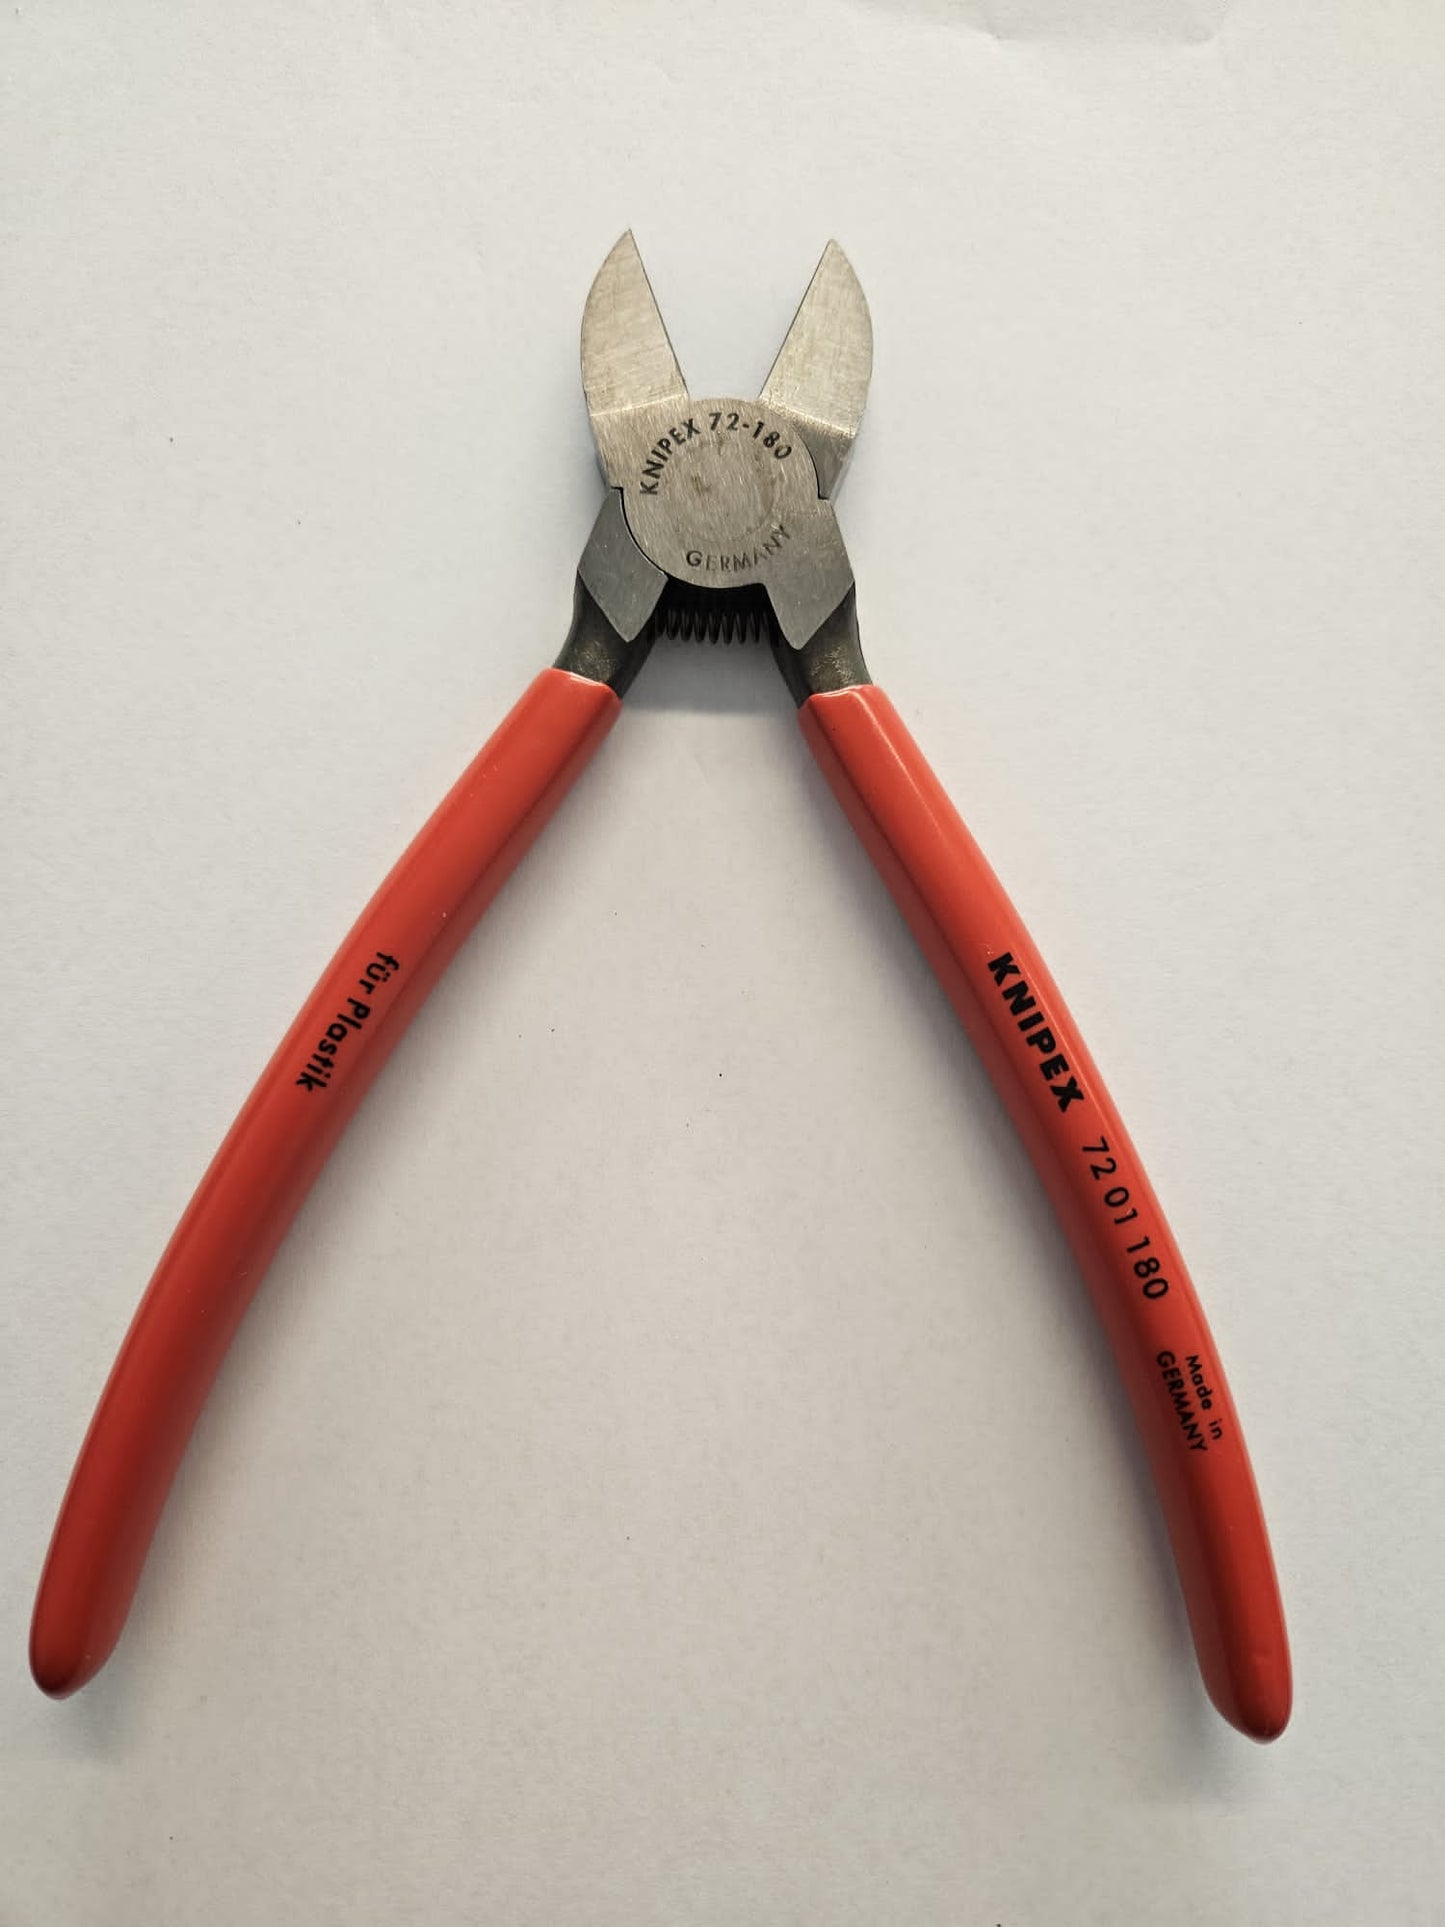 04 300 001 Tronchese "KNIPEX"